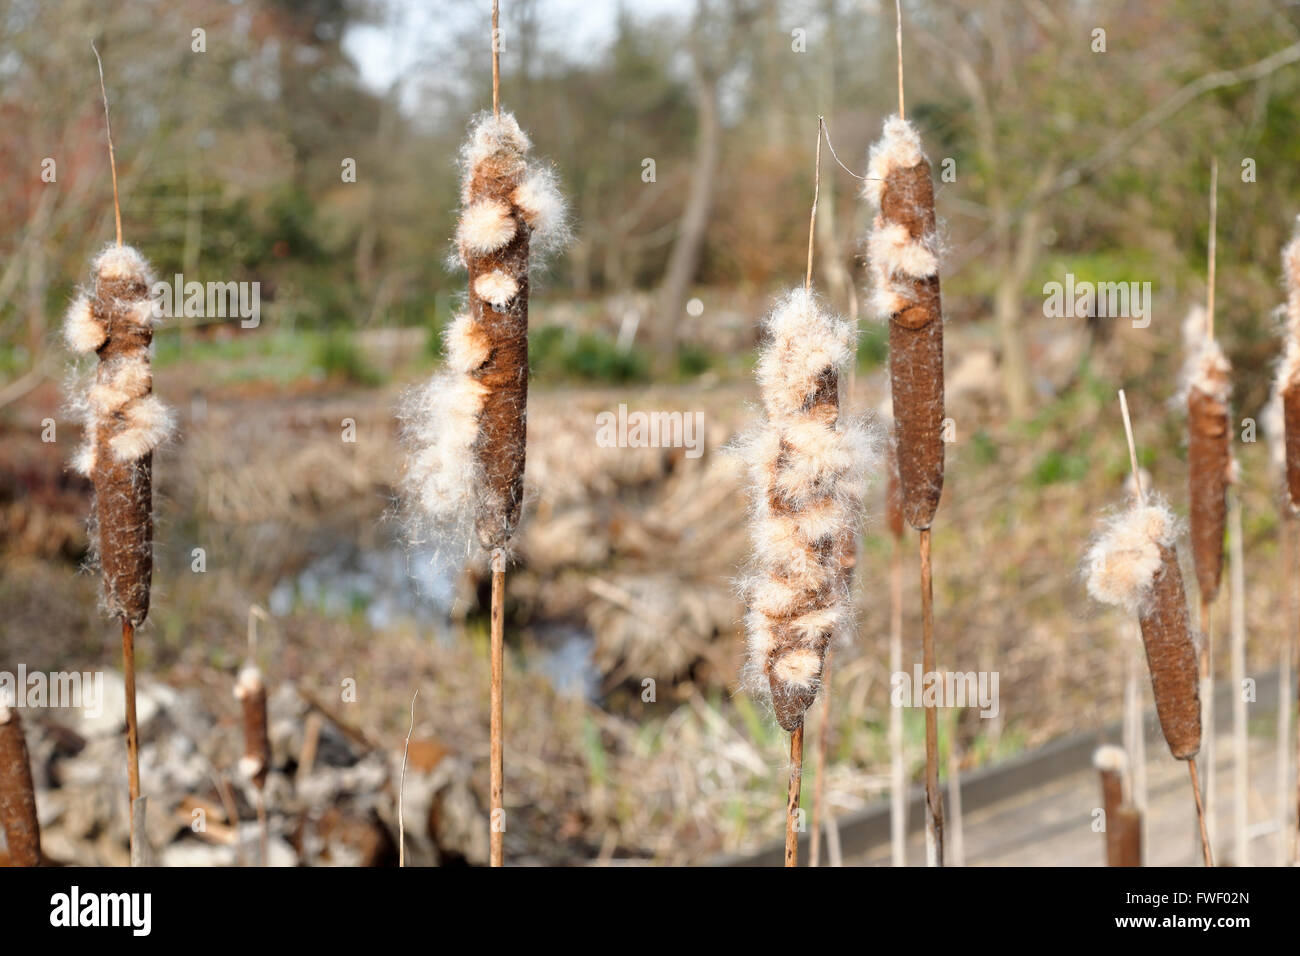 Common bulrush (Typha latifolia), a perennial herbaceous wetland plant growing at RHS Gardens, Wisley, Surrey, UK in winter Stock Photo